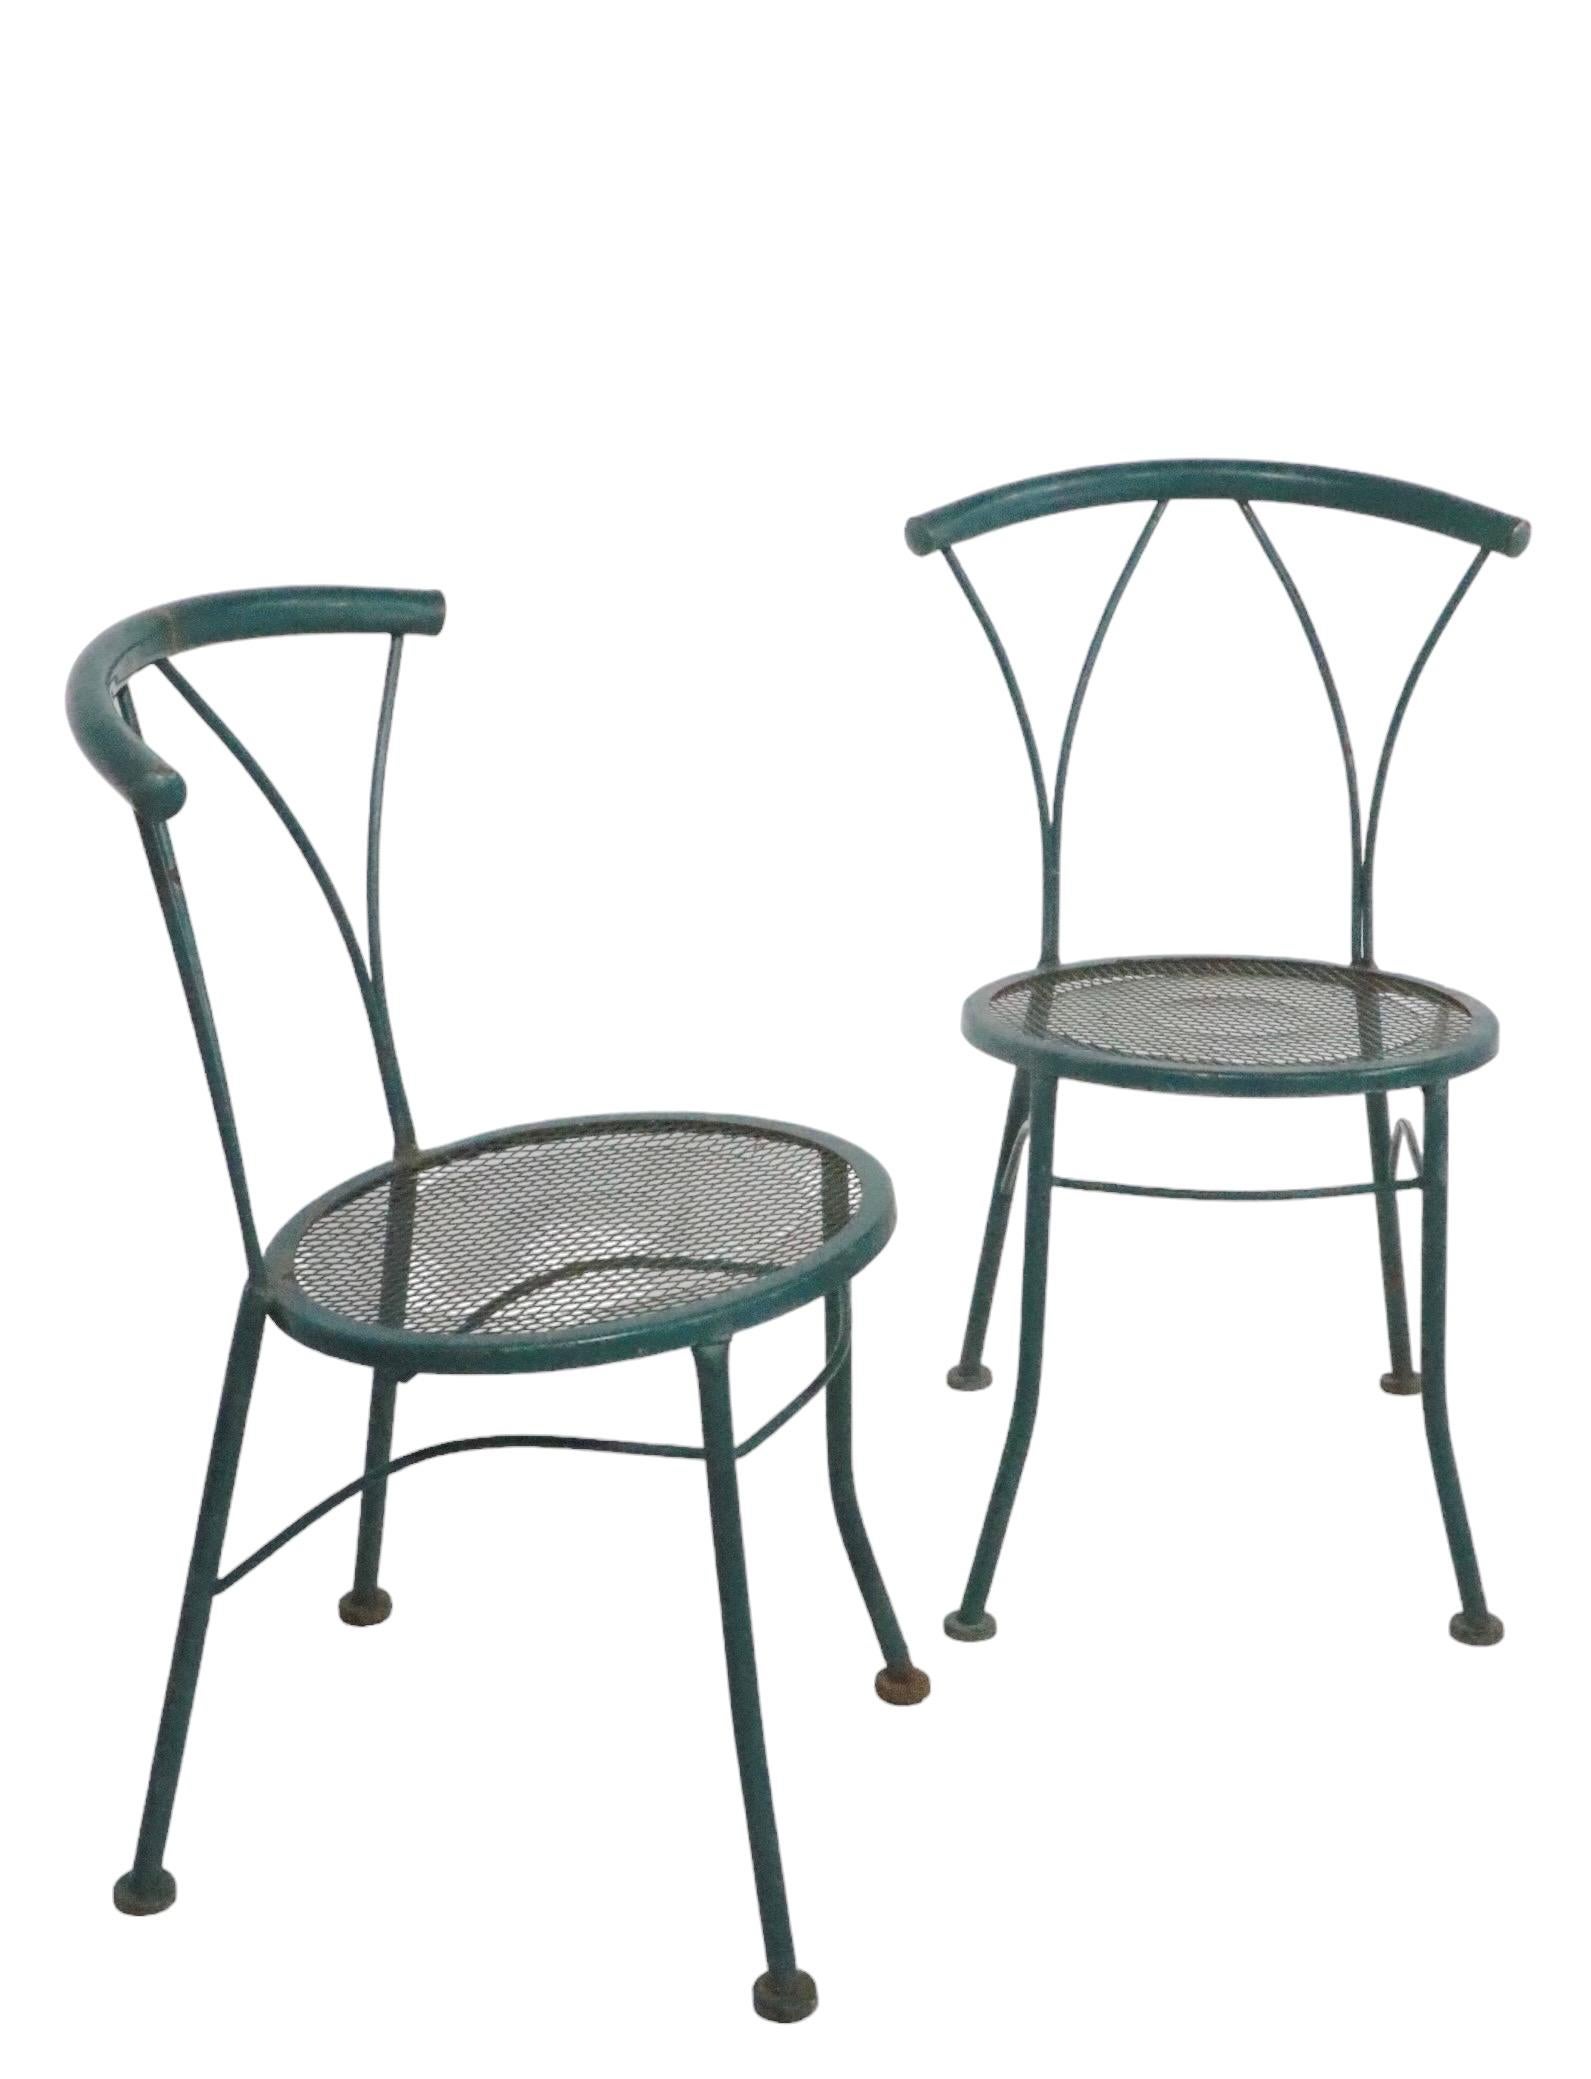 Pr. Wrought Iron and Metal Mesh Garden Patio Poolside Bistro Cafe  Dining Chairs For Sale 5